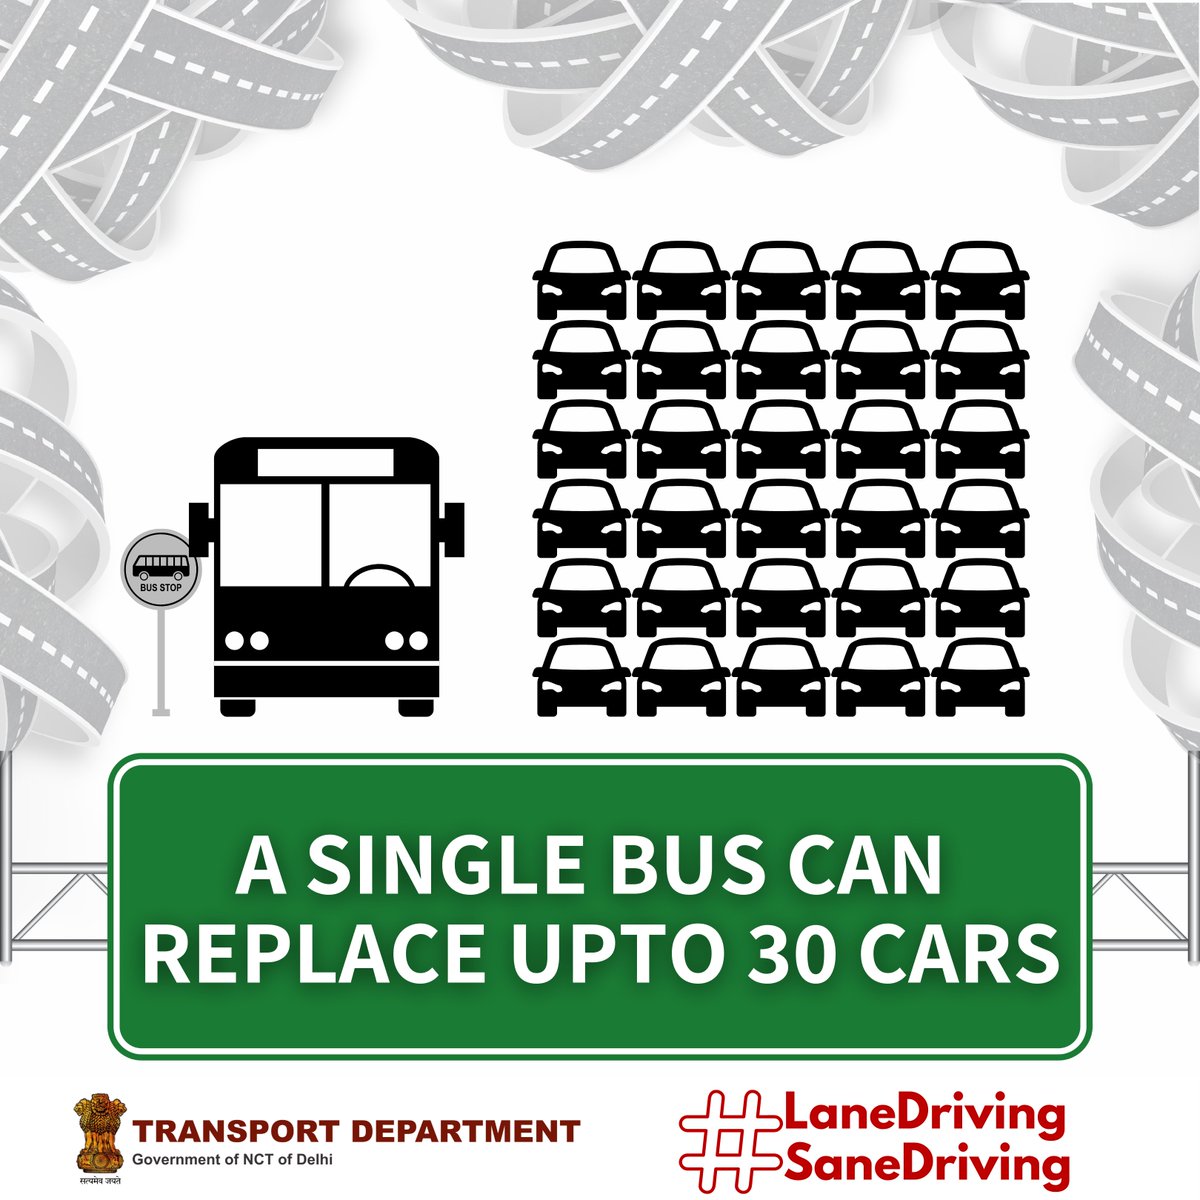 30 people in a bus occupy less road space than 30 persons in as many cars. Bus lanes can help you reach home faster. Take the bus ride home! Respect bus lanes. Help us keep Delhi streets safe. #LaneDrivingSaneDriving #SadakSurakshitDilliSurakshit @ashishkundra